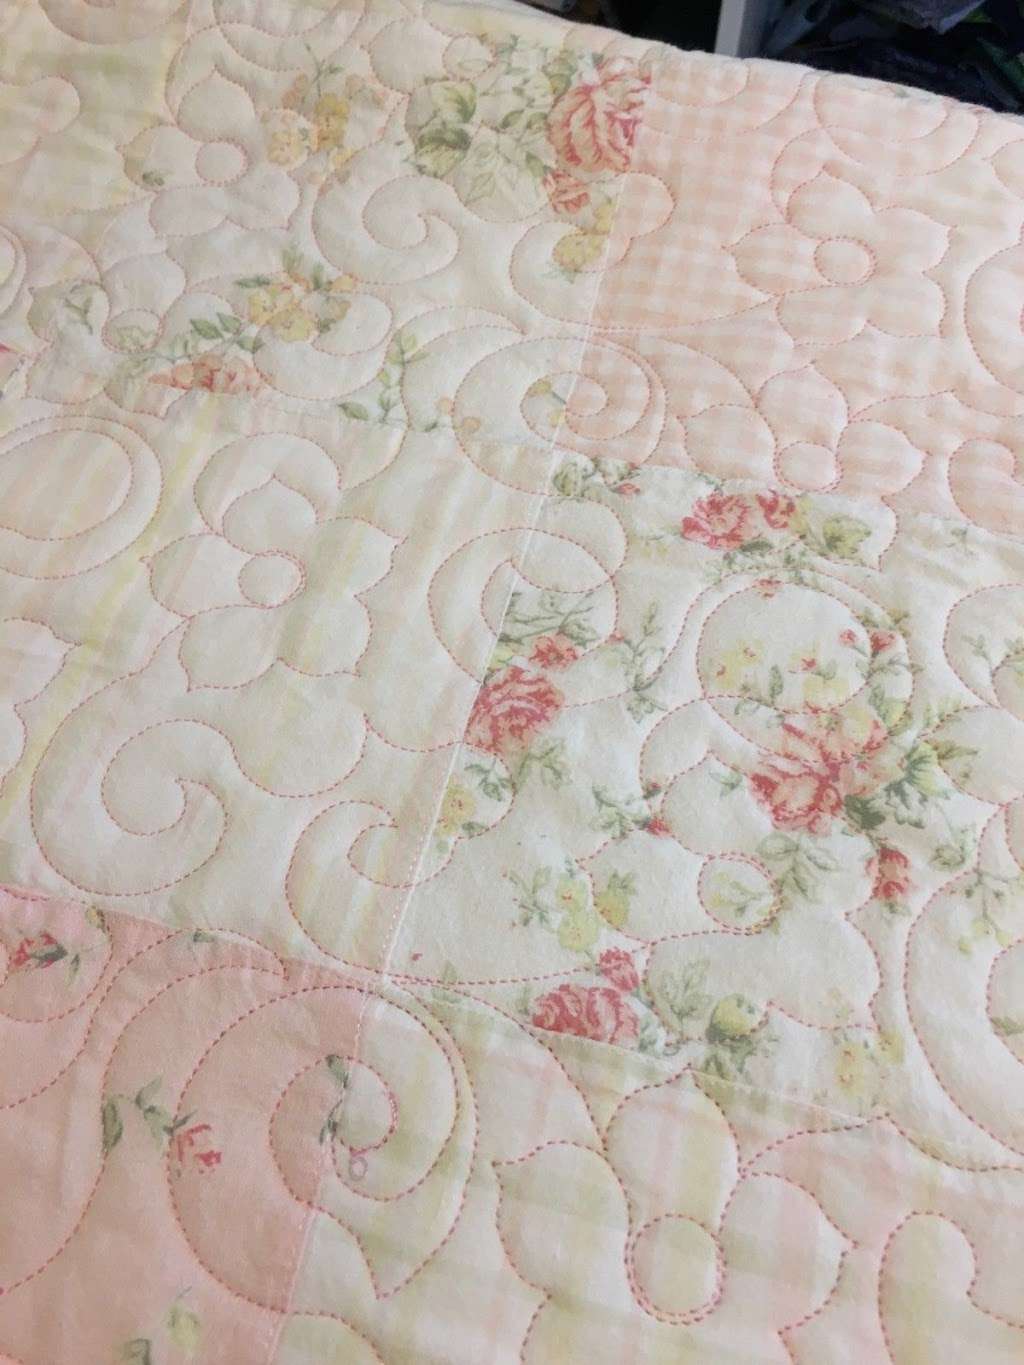 Jack and Jill Quilting (Longarm Quilters) | 4062 Westwind Dr, Woodbridge, VA 22193 | Phone: (703) 688-2528